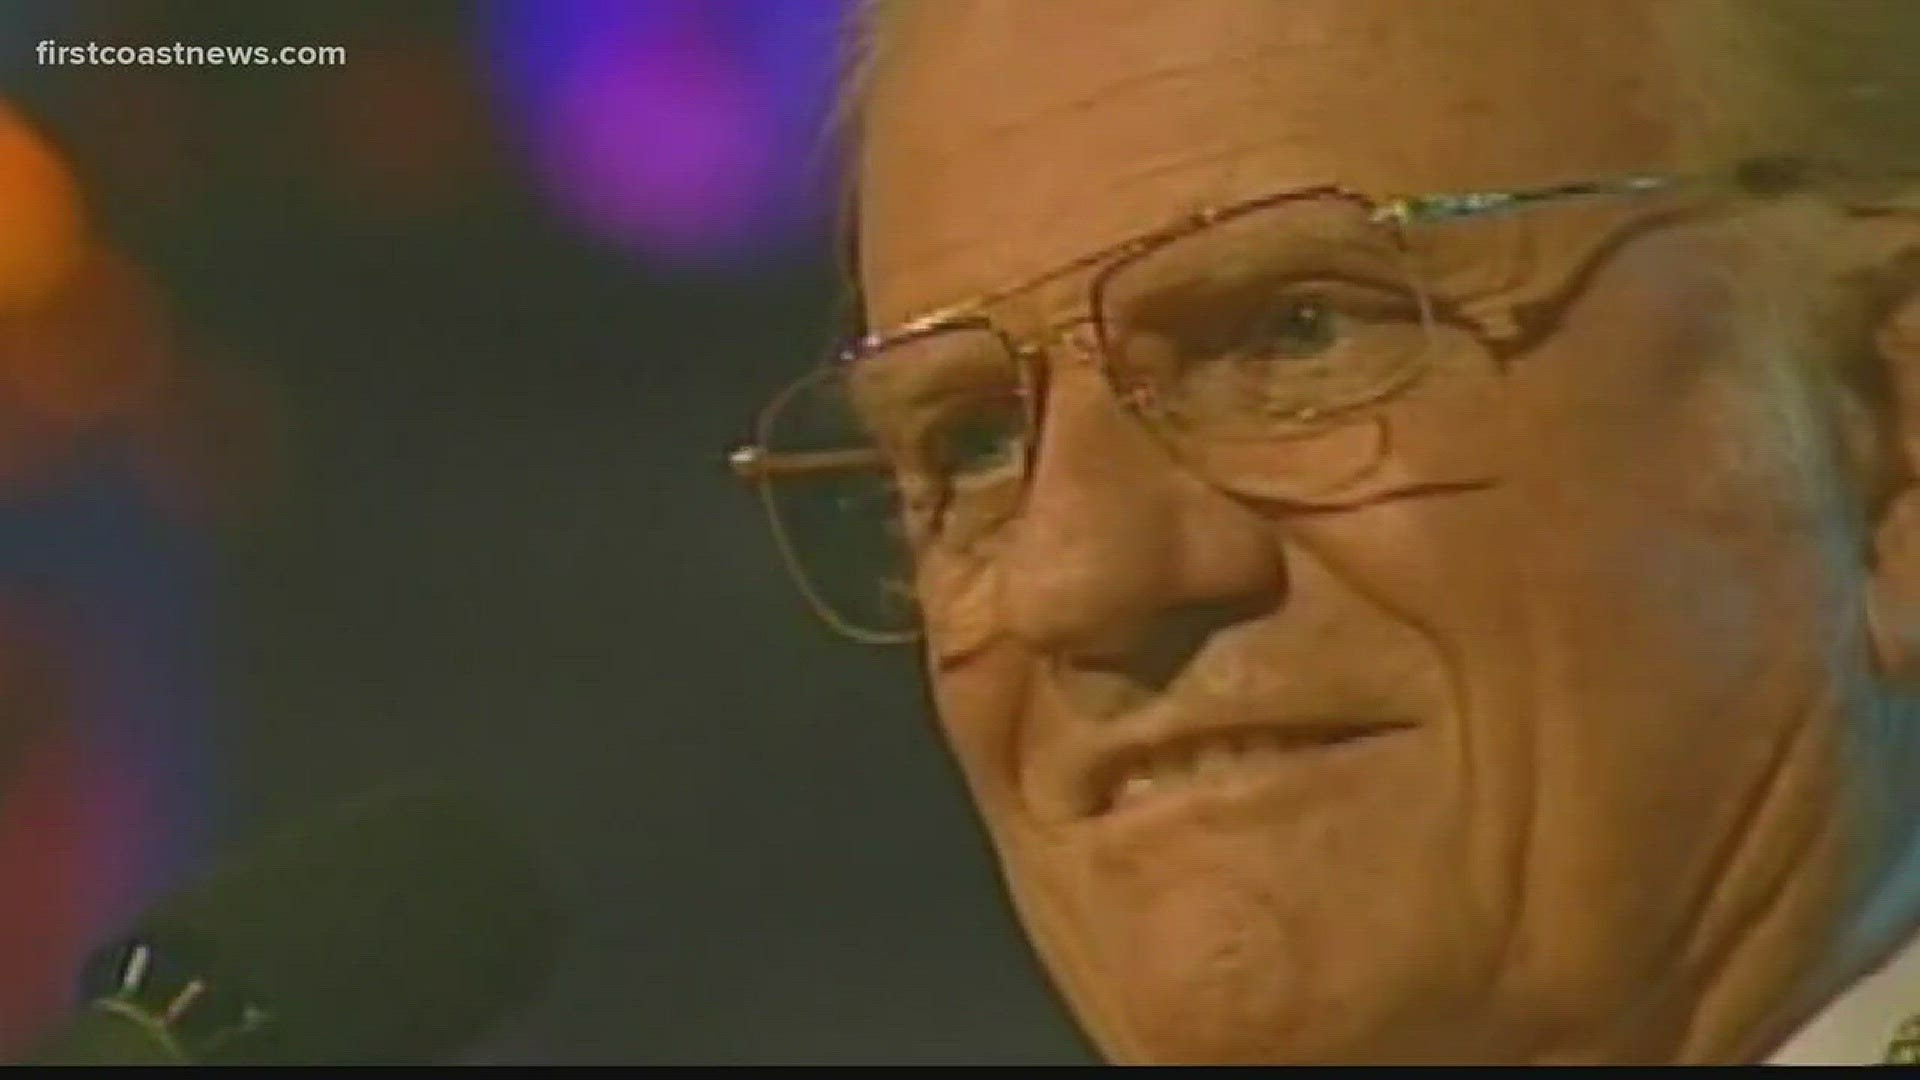 Ken Amaro reports on Billy Graham's impact on the First Coast.